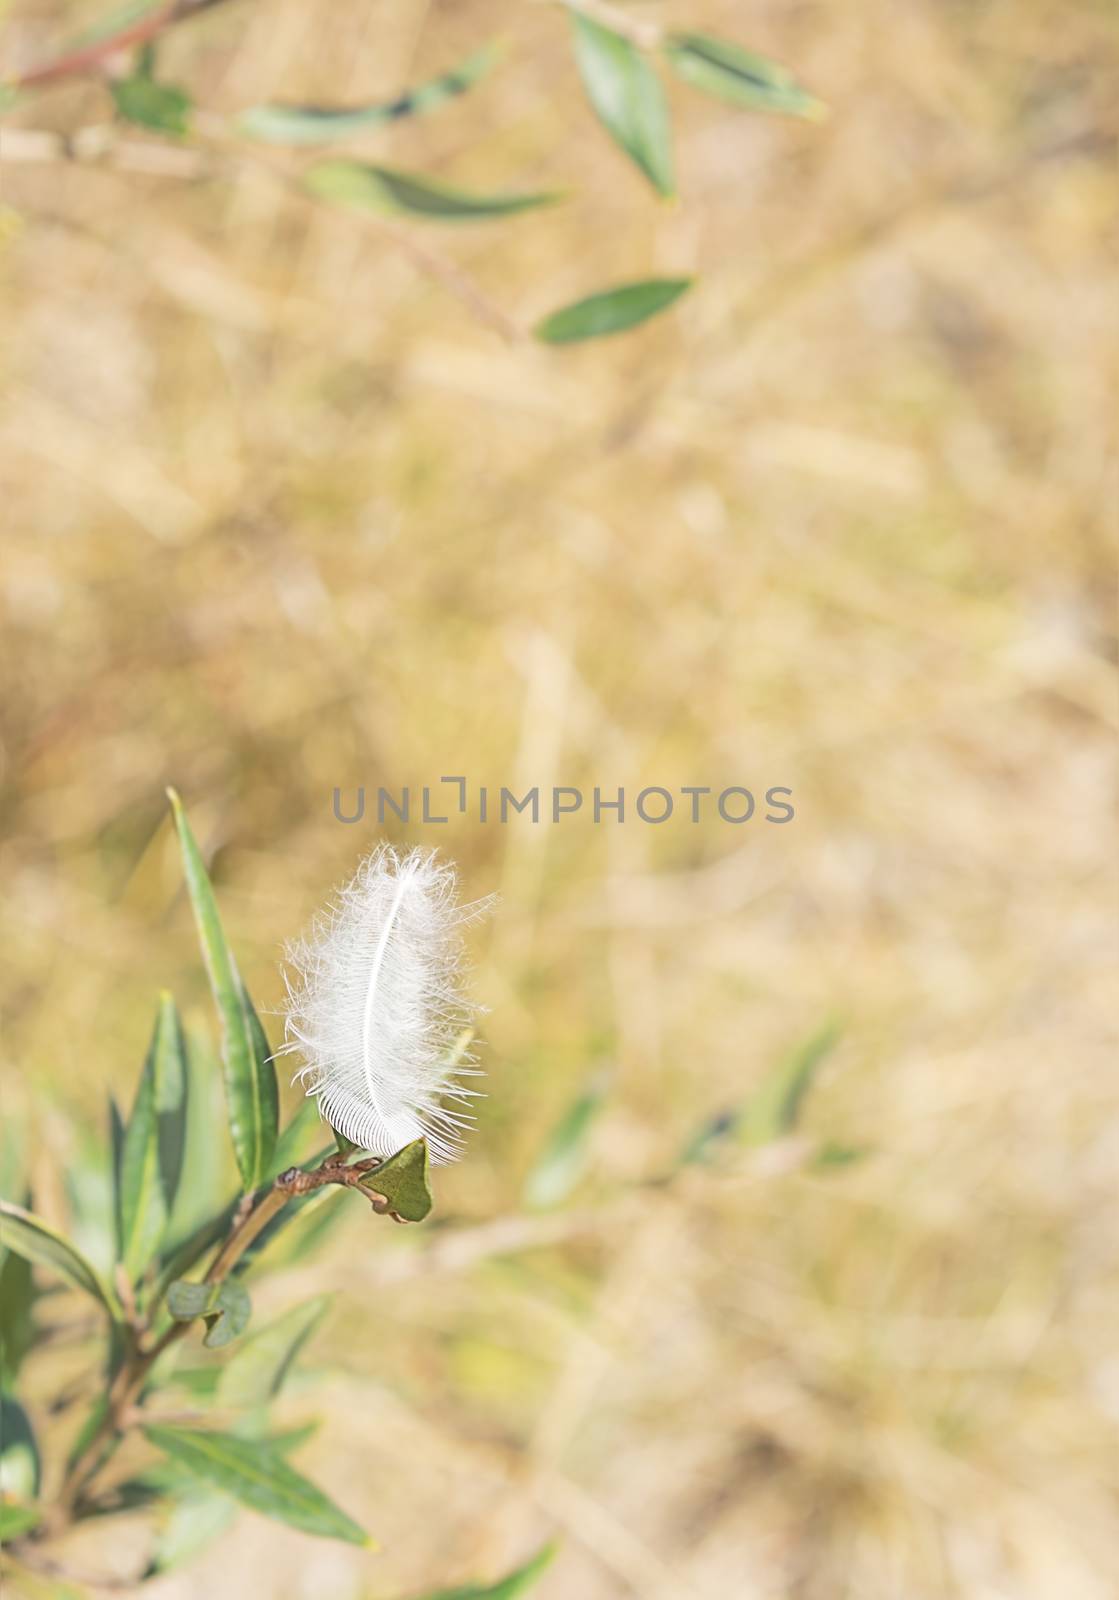 White downy fluffy feather in peaceful scene by sherj